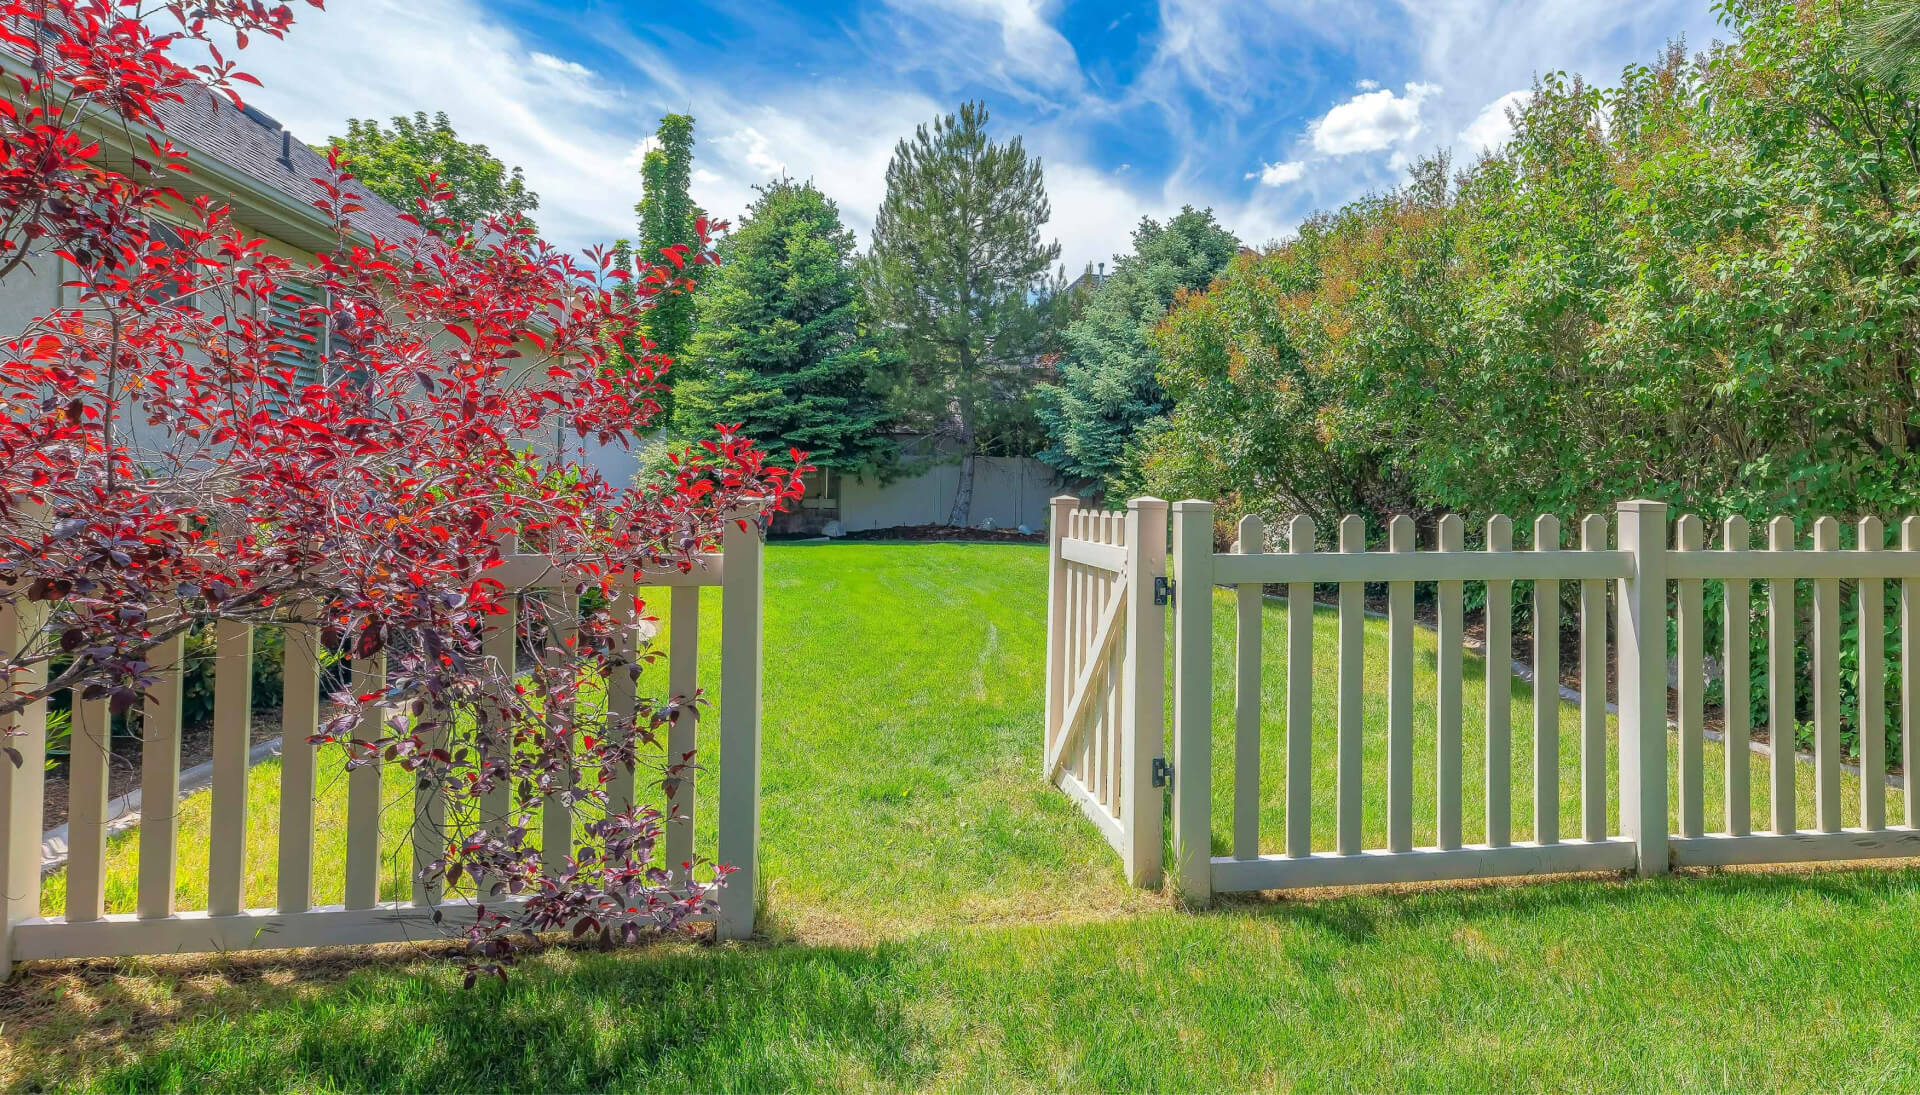 A functional fence gate providing access to a well-maintained backyard, surrounded by a wooden fence in Wilmington